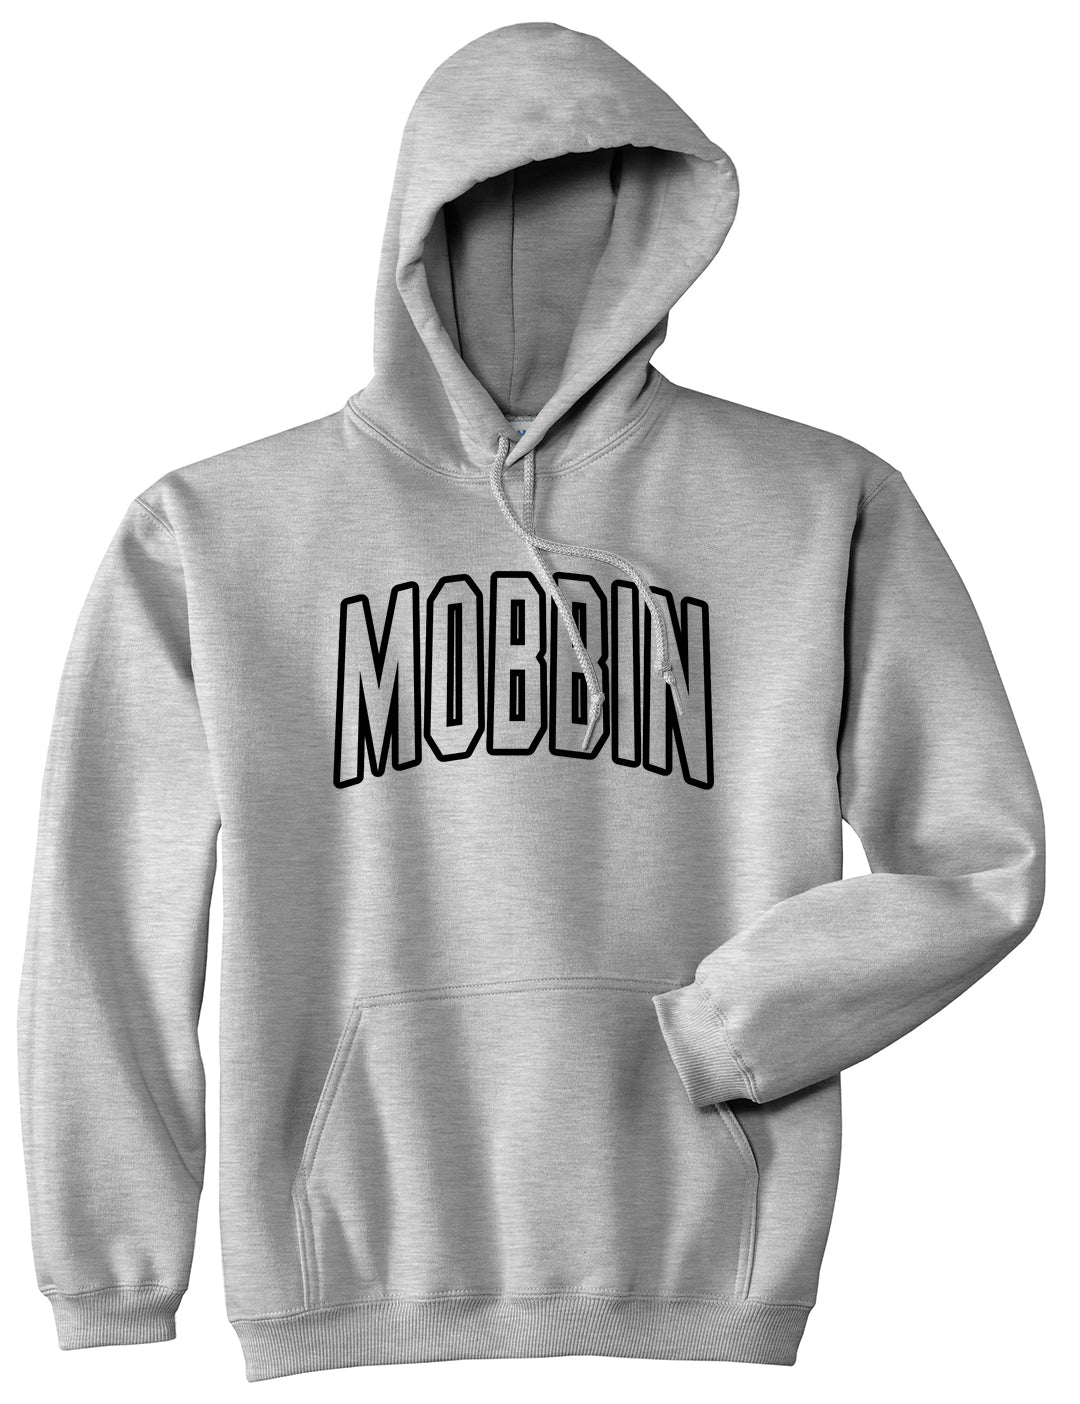 Mobbin Outline Squad Mens Pullover Hoodie Grey by Kings Of NY